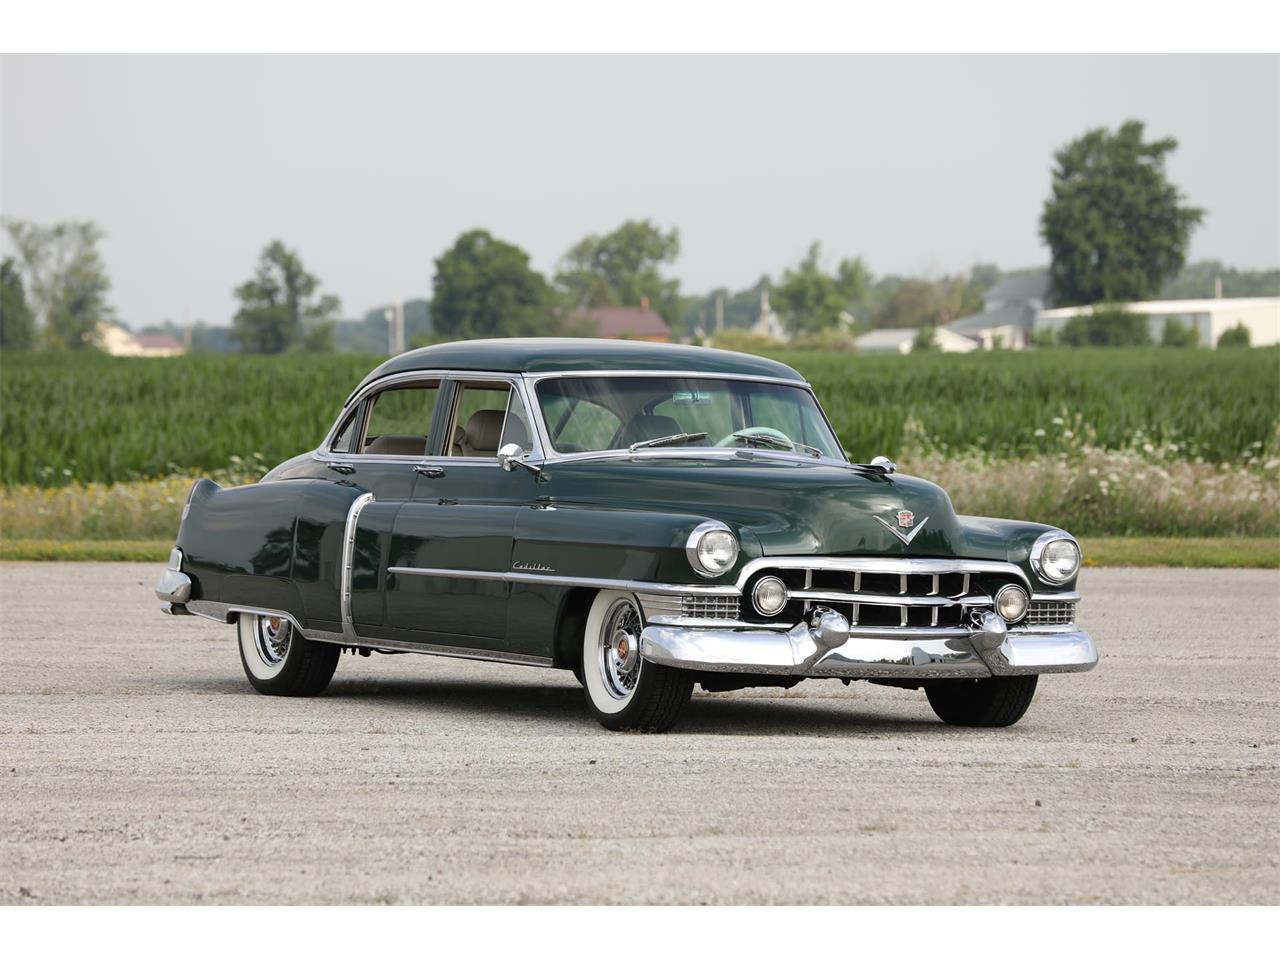 For Sale at Auction: 1951 Cadillac Series 62 for sale in Auburn, IN